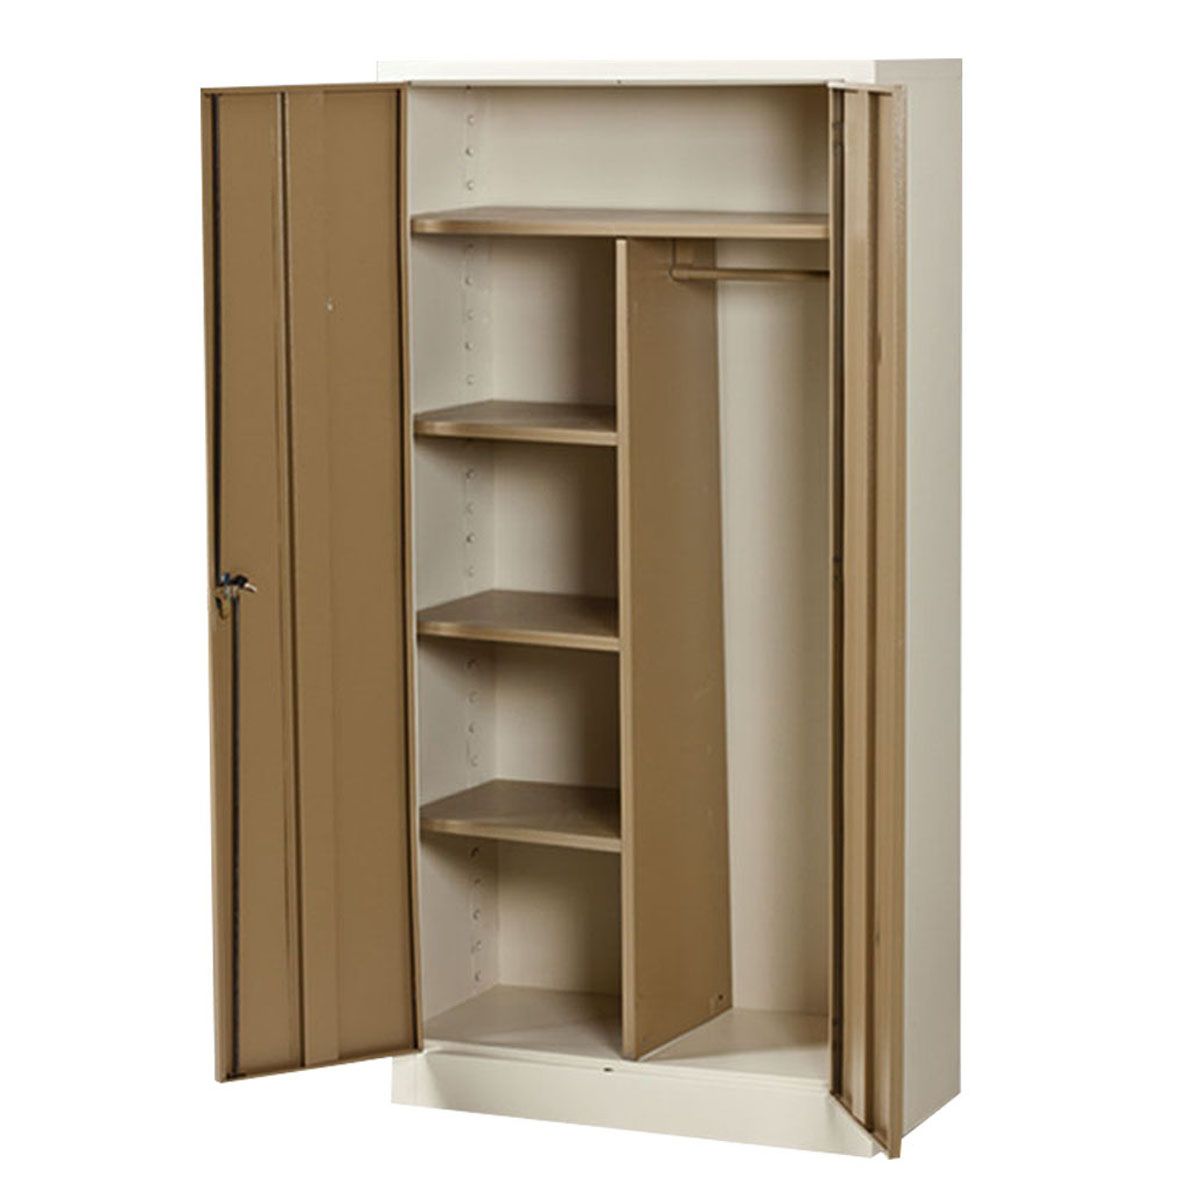 Best And Newest Heavy Duty Wardrobes In Heavy Duty Steel Gents Wardrobe. Shop Online And Save. (Photo 3 of 10)